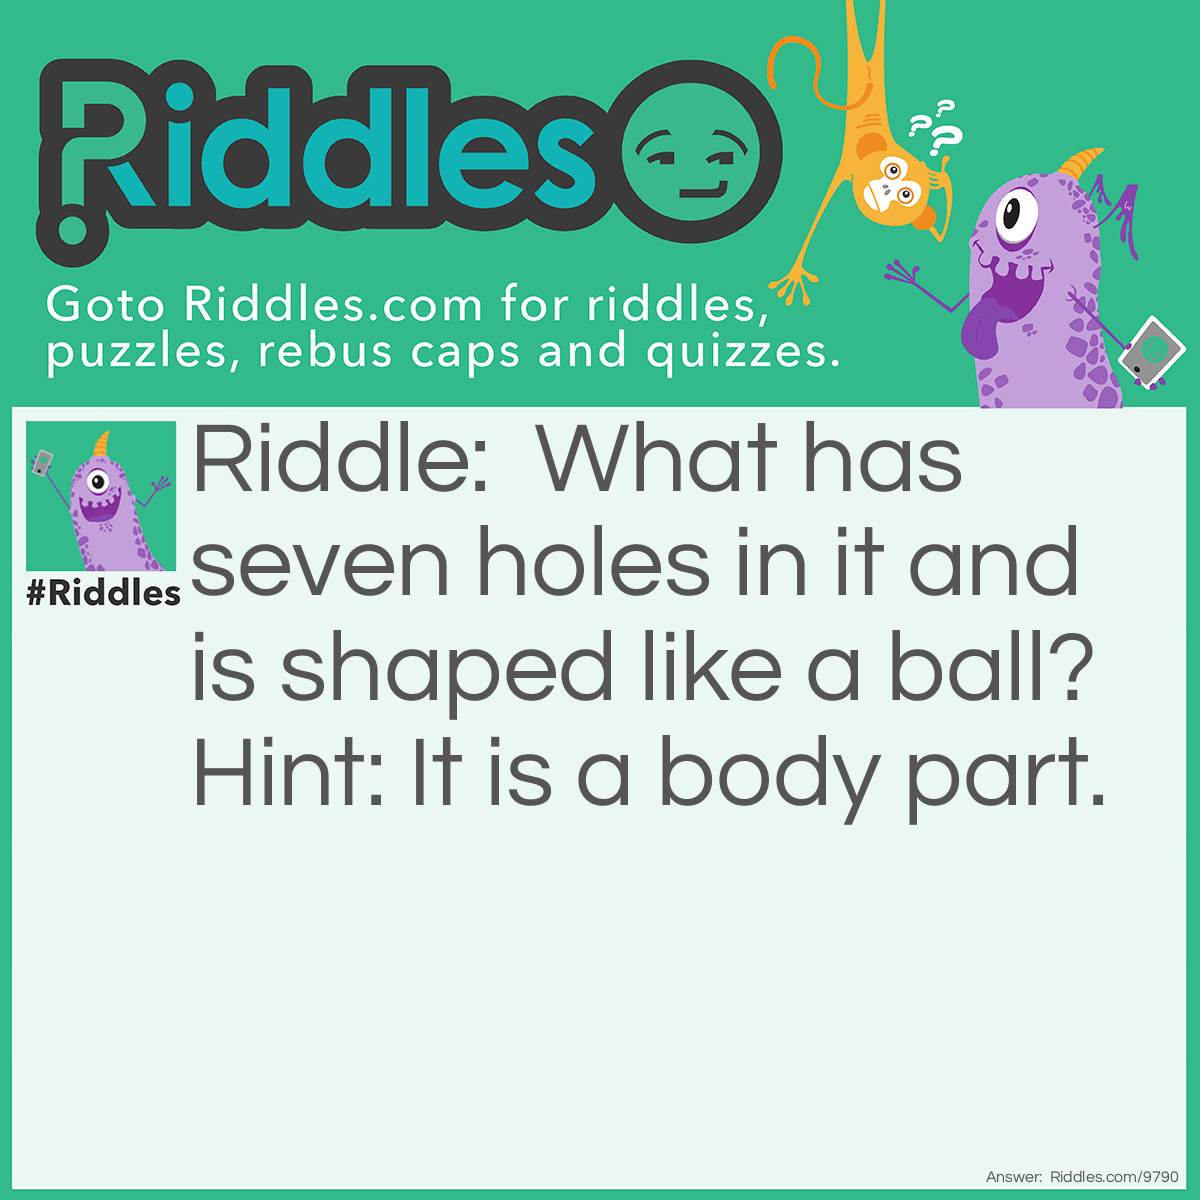 Riddle: What has seven holes in it and is shaped like a ball? Hint: It is a body part. Answer: Your head.